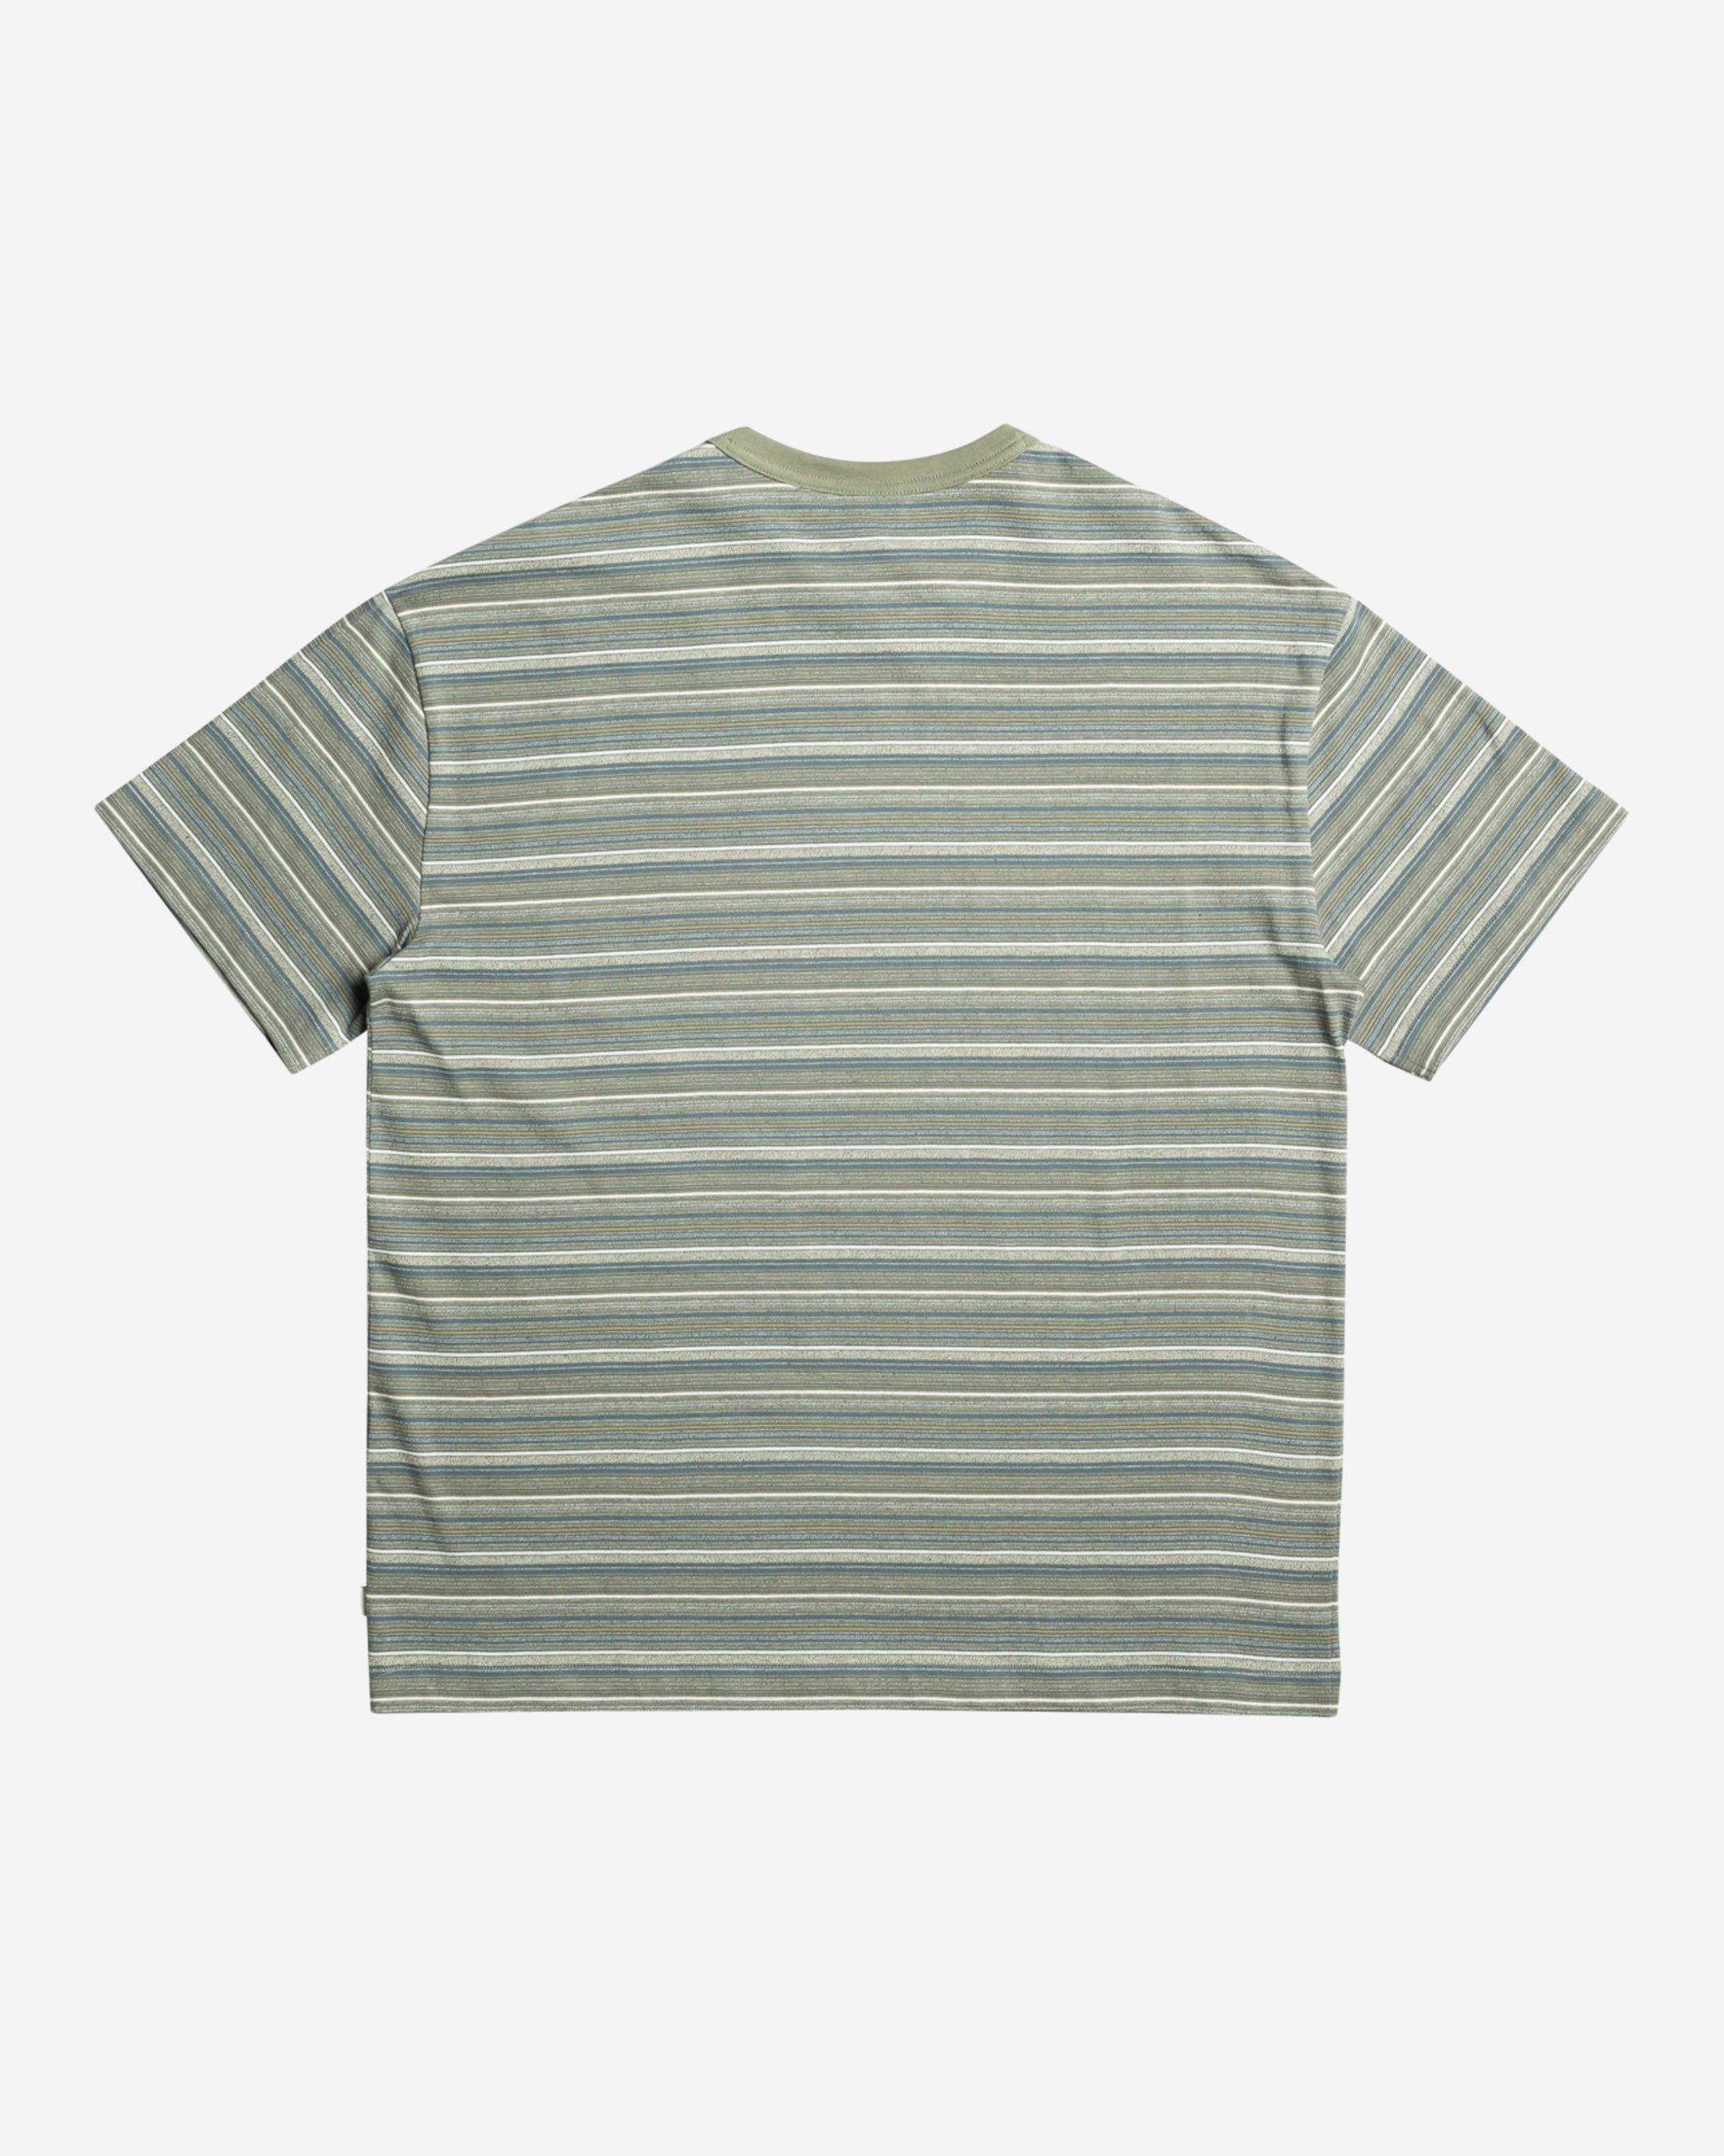 Made of pure cotton fabric with yarn-dyed stripes, this classic-fit tee features a ribbed neckline and an embroidered logo on the front.